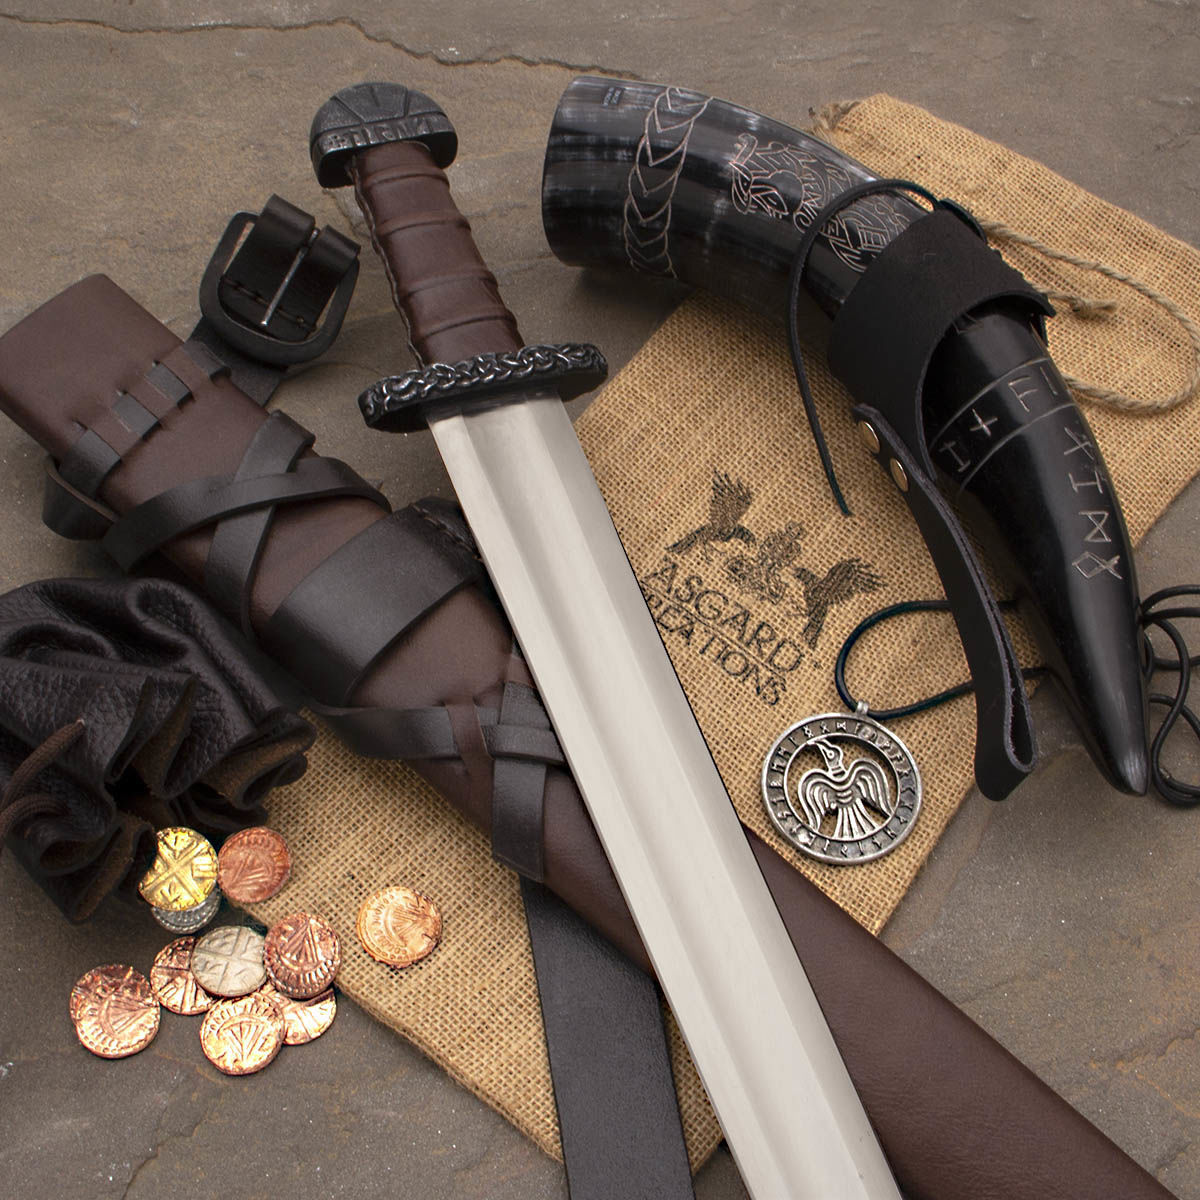 The Viking Explorer Box with Sword, leather belt and scabbard, drinking horn with frog, leather pouch with coins and a pewter raven necklace